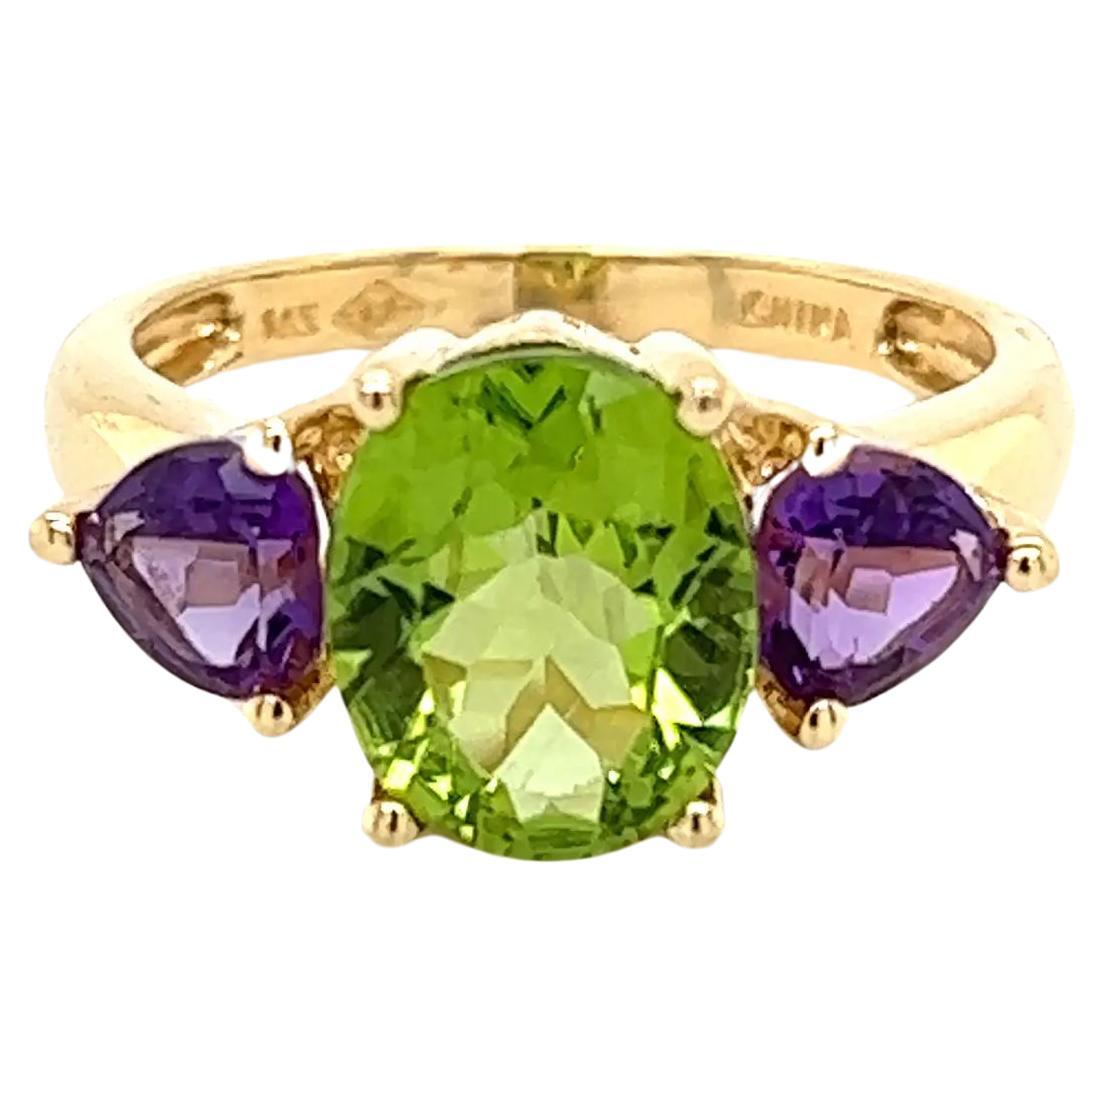 Vintage 2.90 Carat Peridot and Amethyst Heart 3 Stone Gold Ring